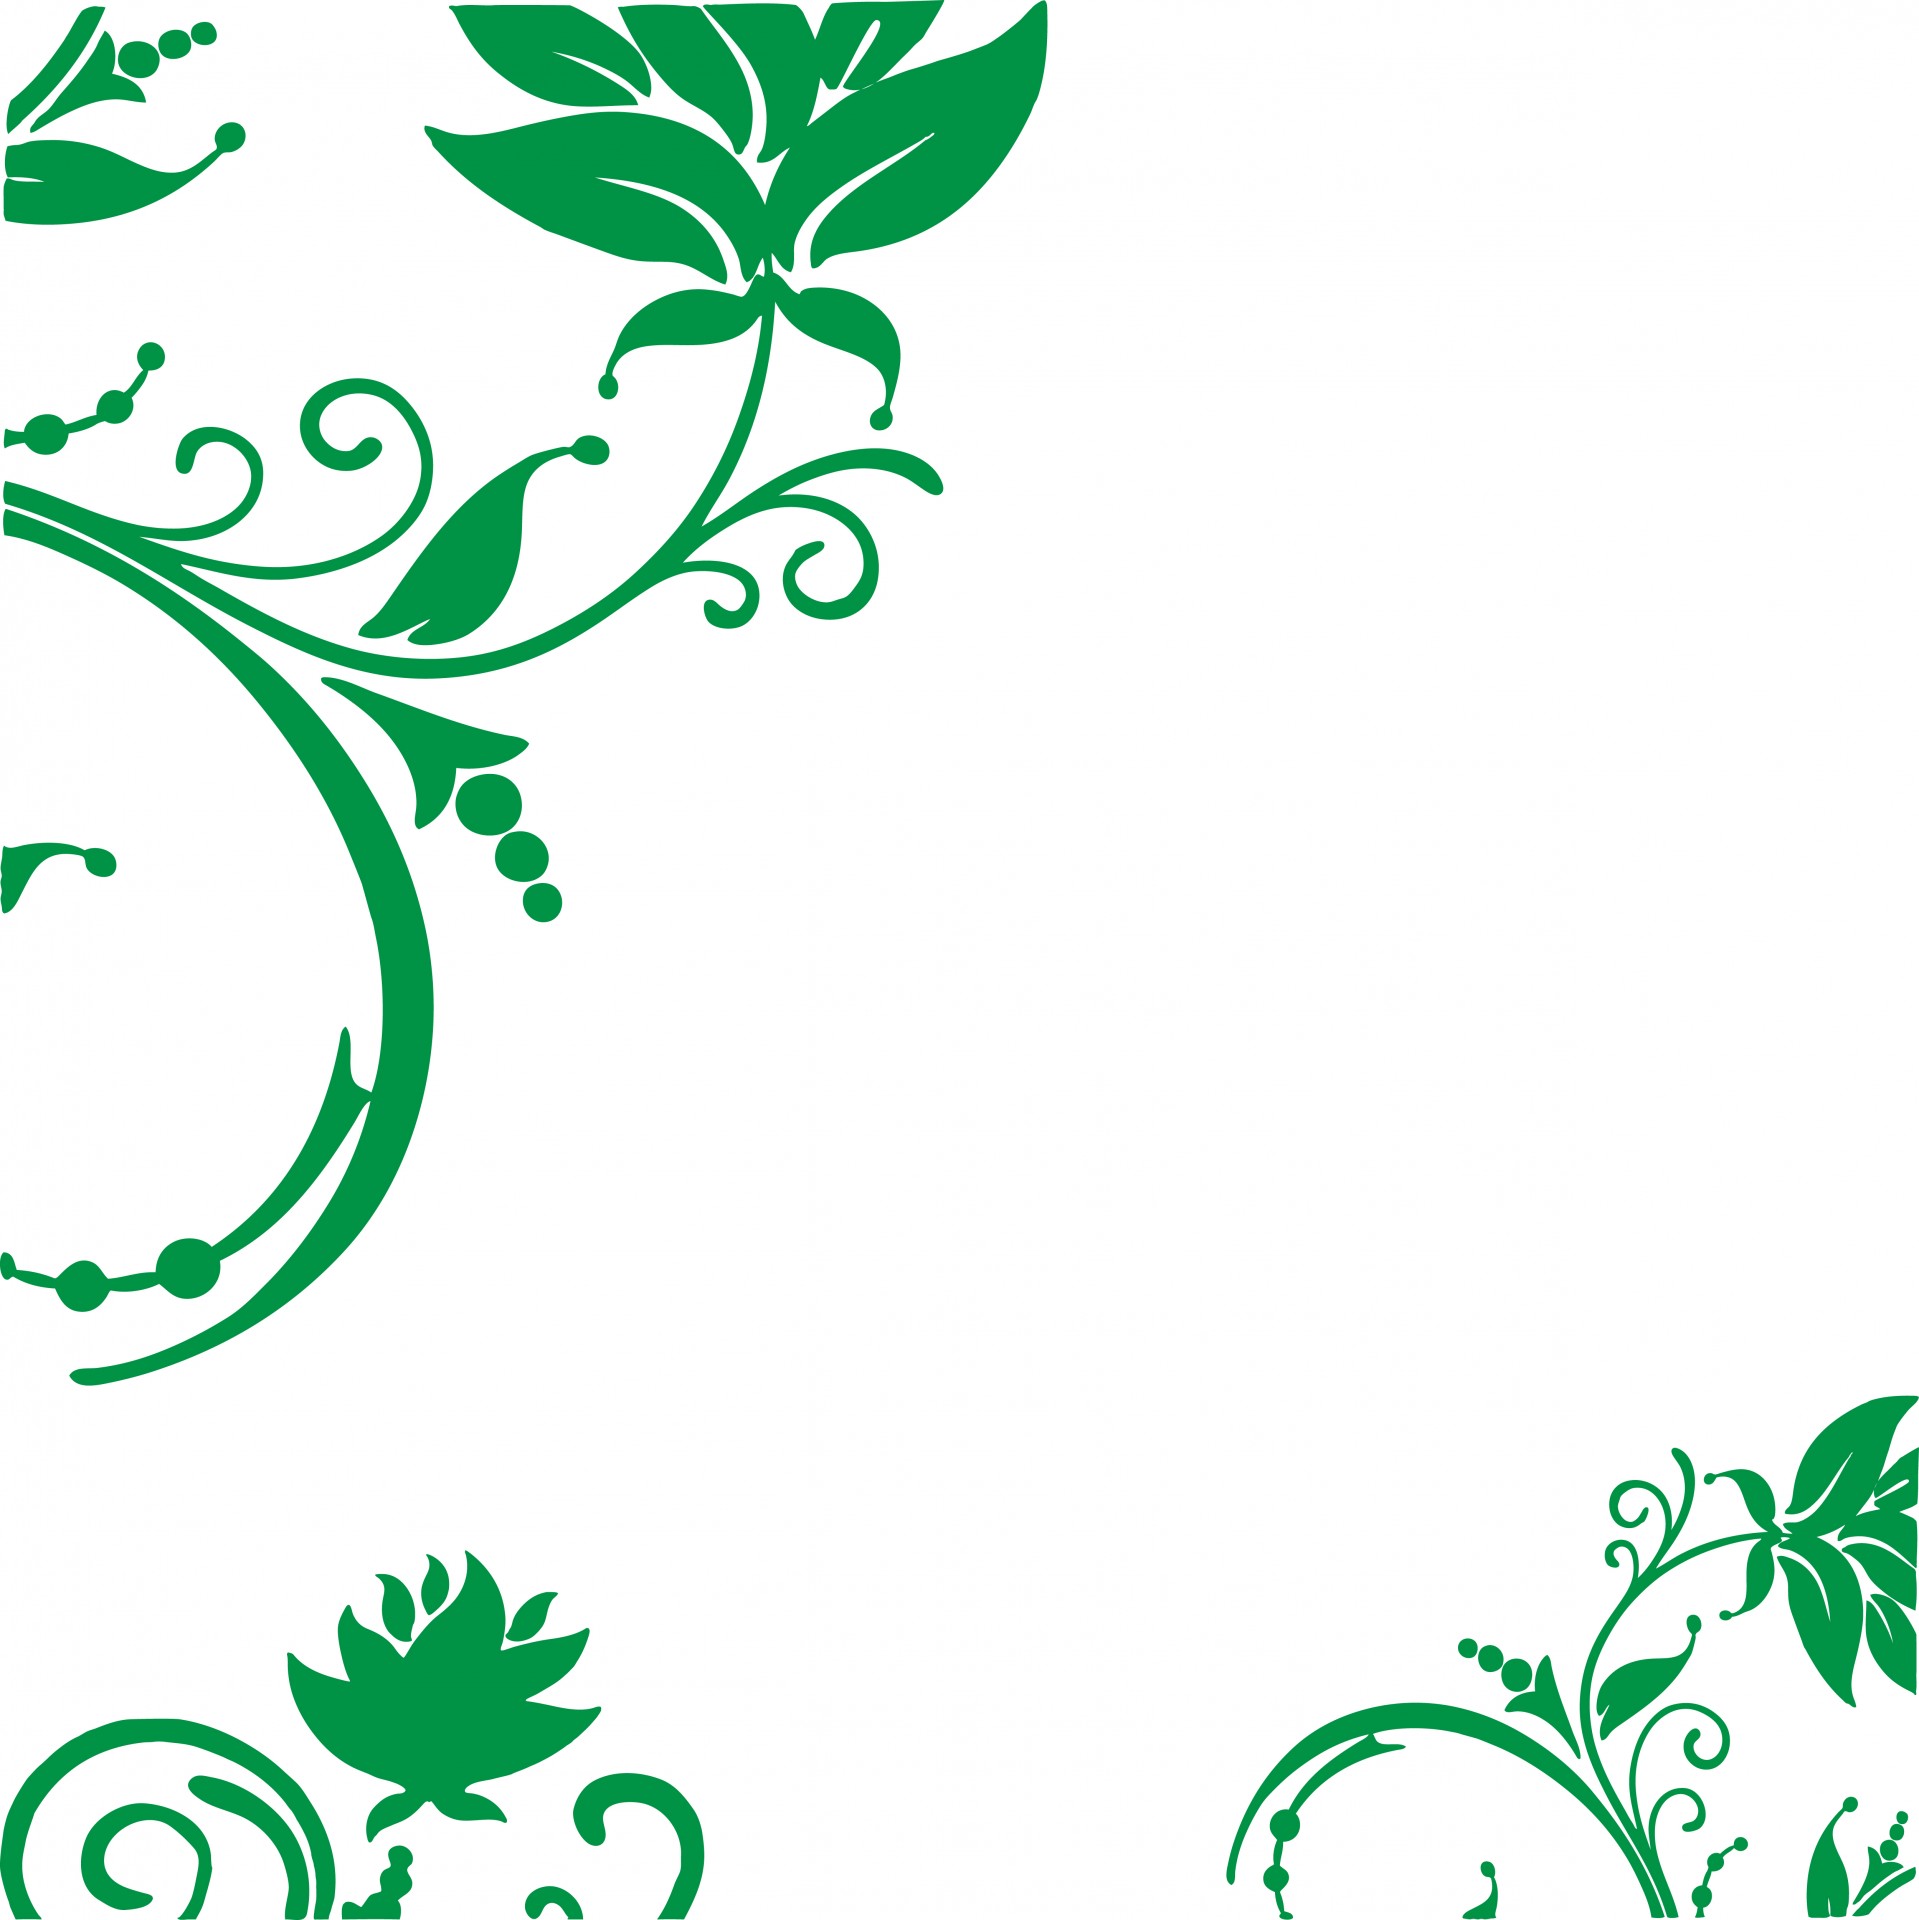 Decorative green floral swirls and leaves pattern